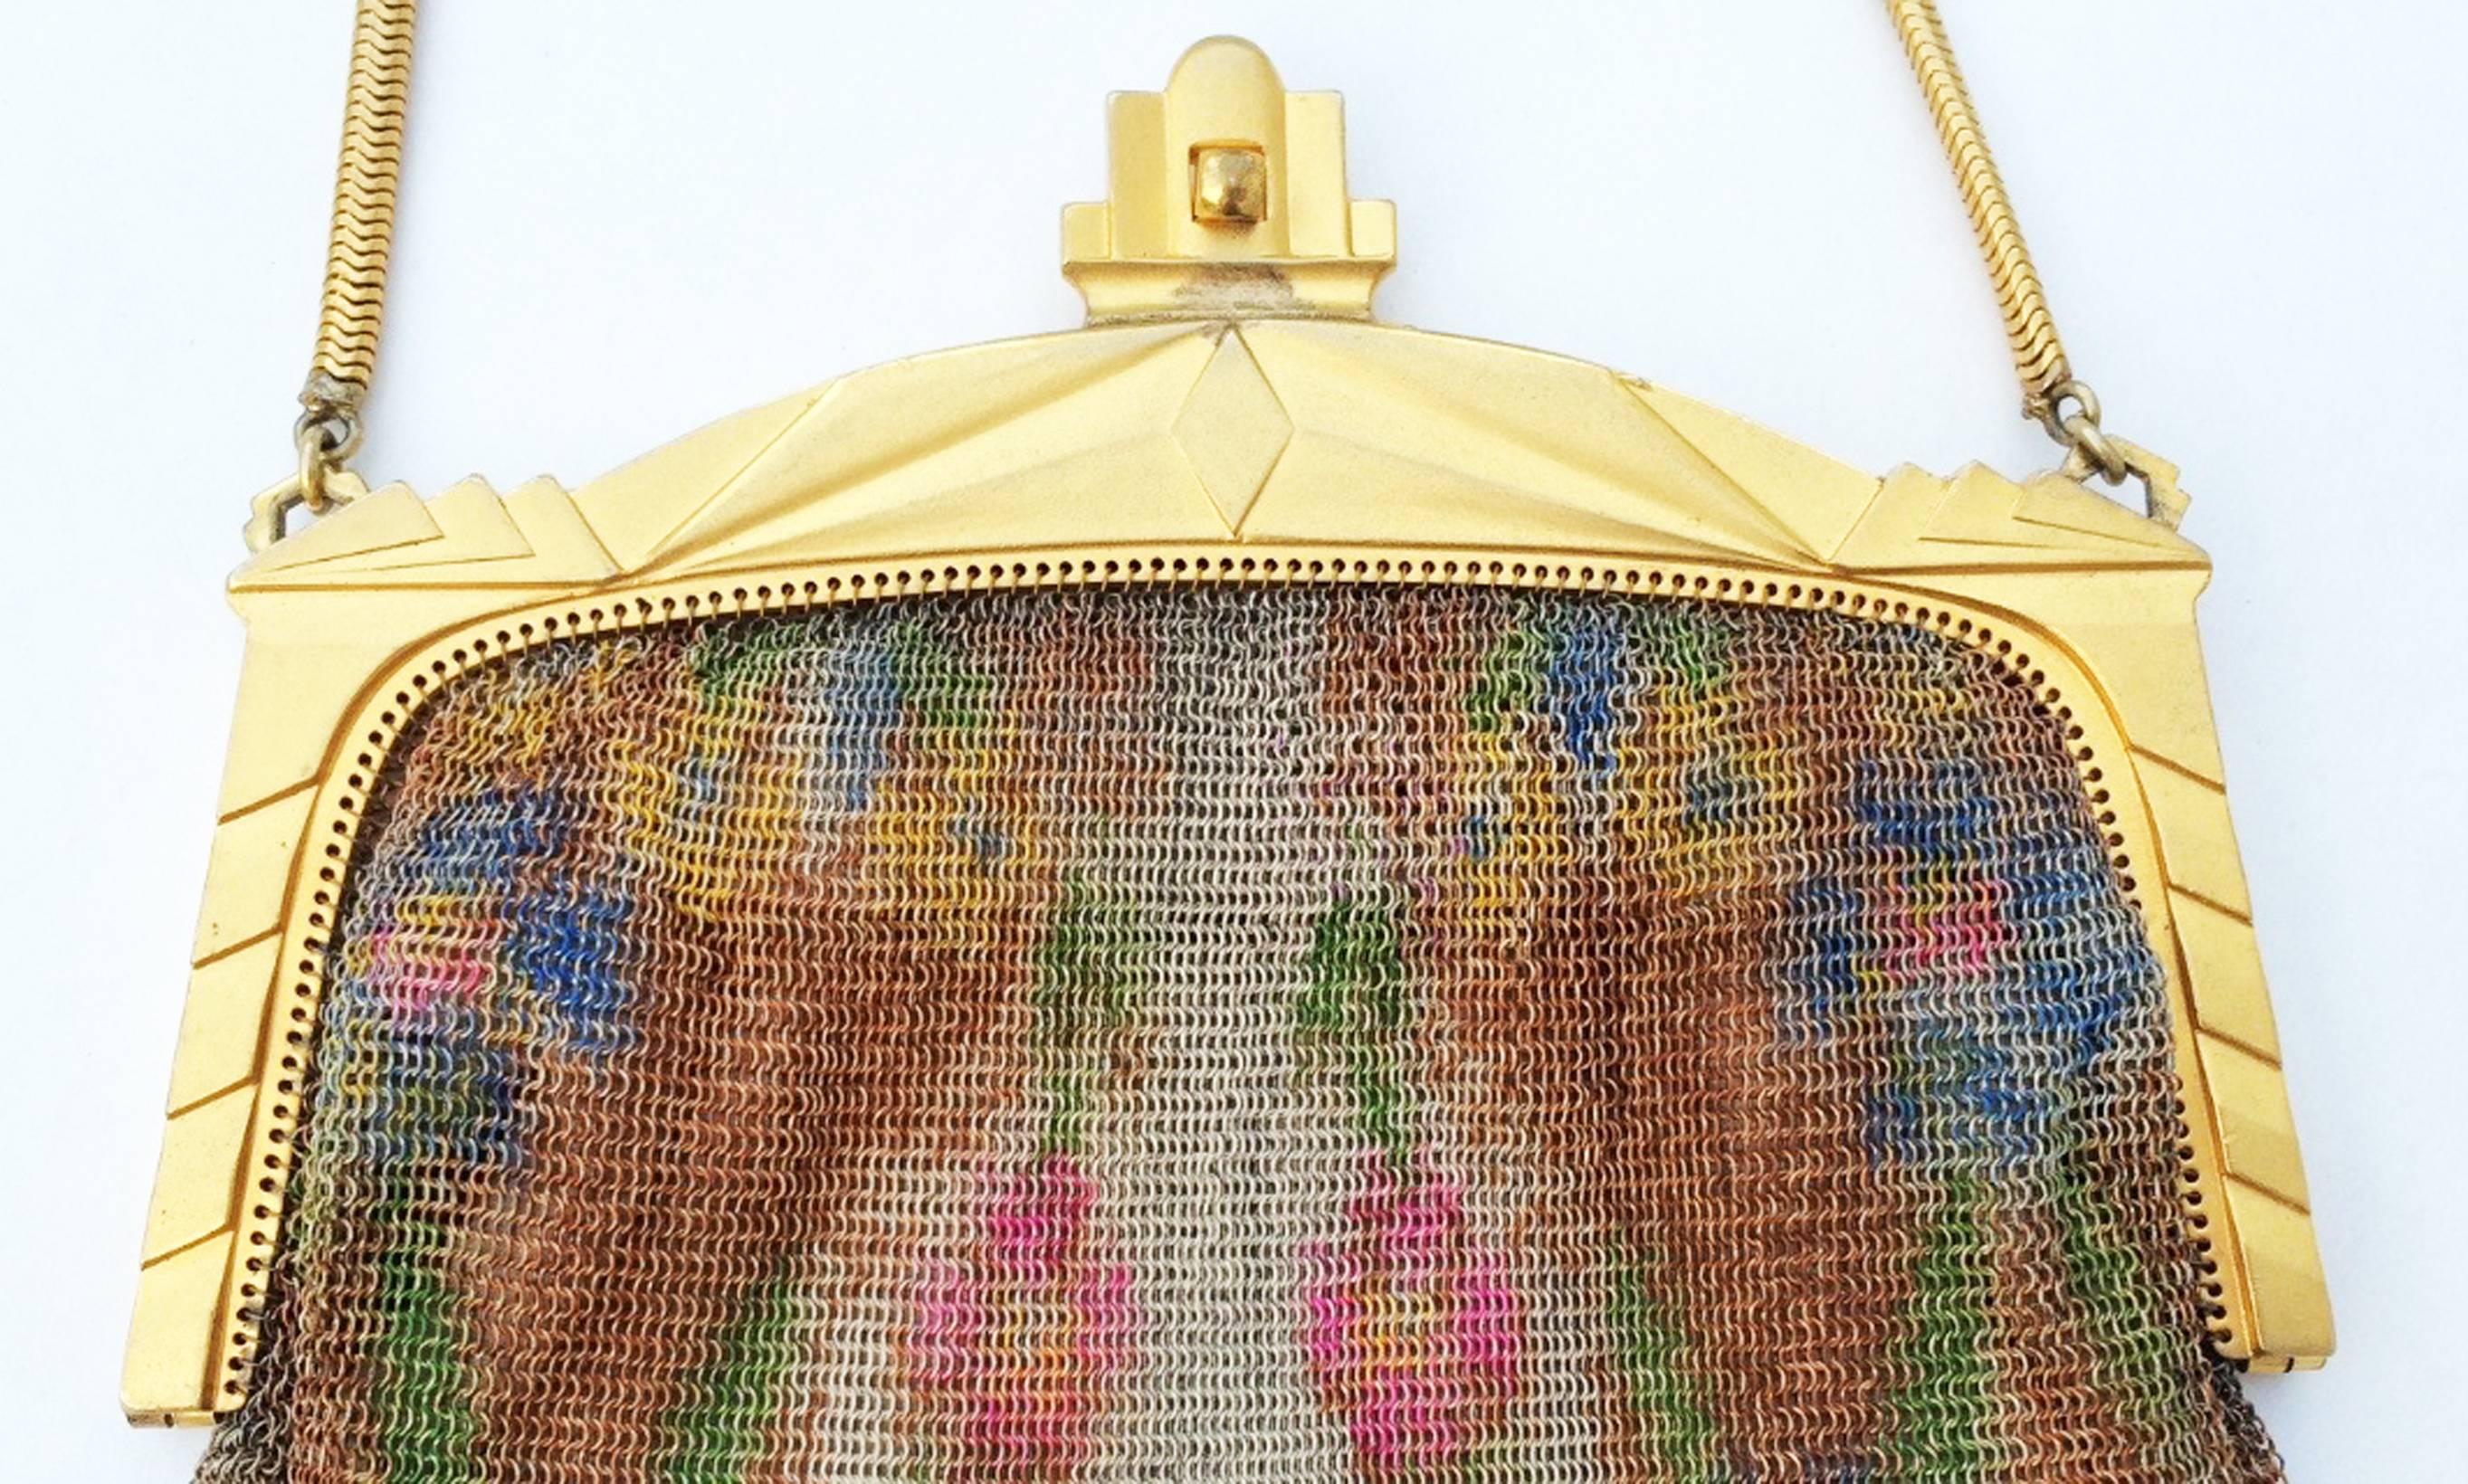 A fine and rare Paul Poiret Art Deco mesh hand bag. Authentic period Whiting & Davis item features a sculpted Art Deco gilt metal frame and hand painted 